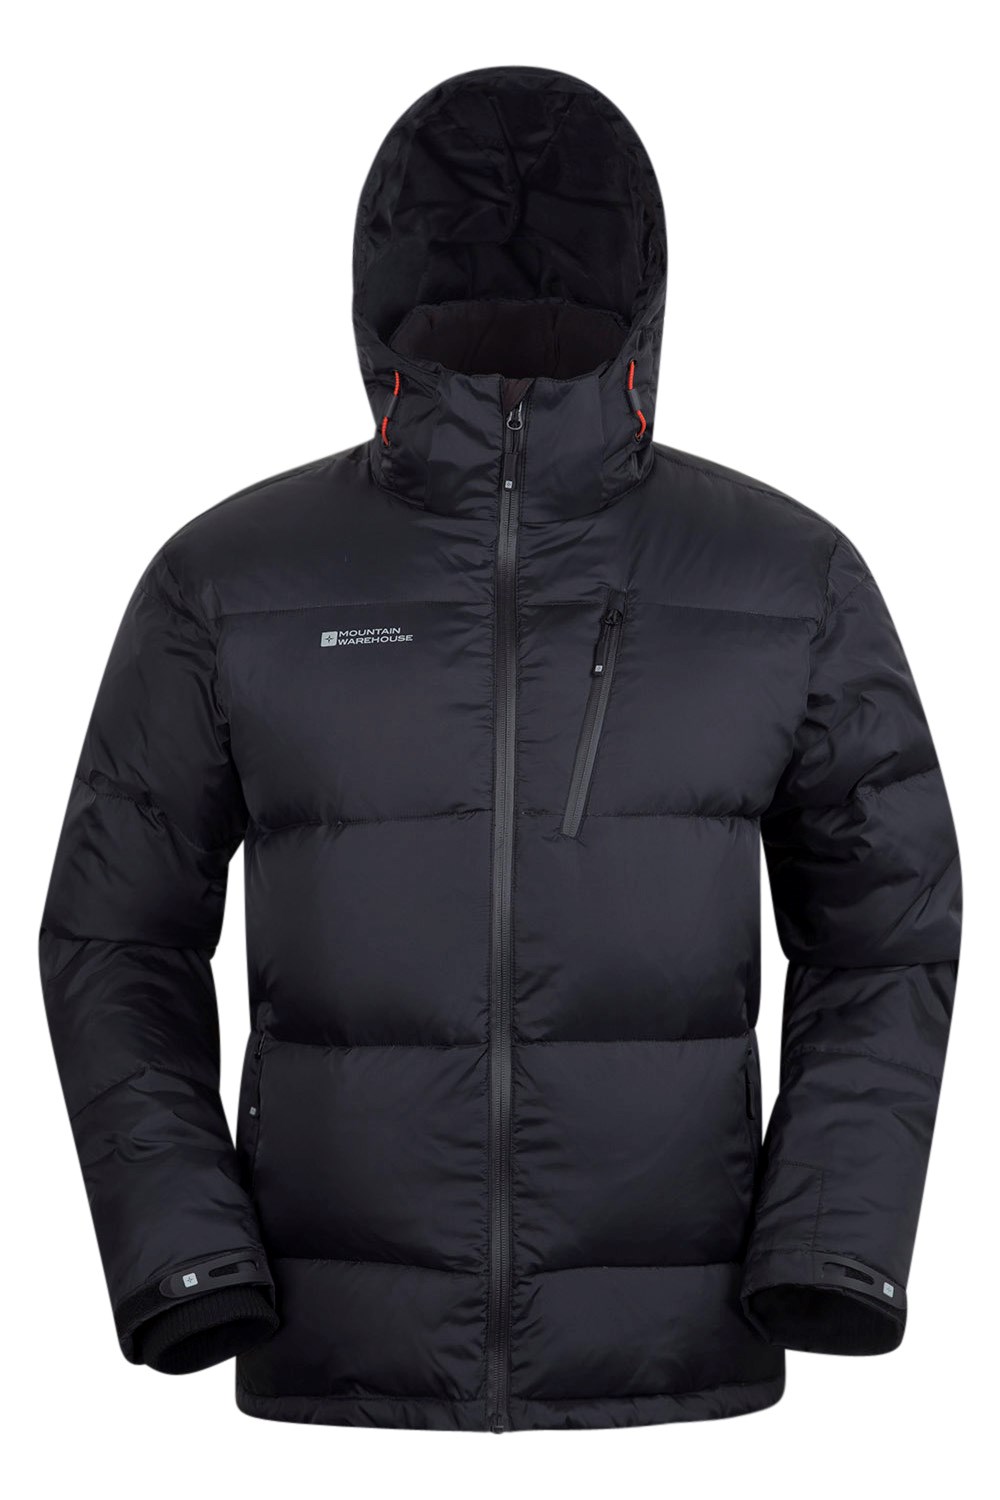 Mountain Warehouse Frost Extreme Mens Down Padded Jacket | eBay